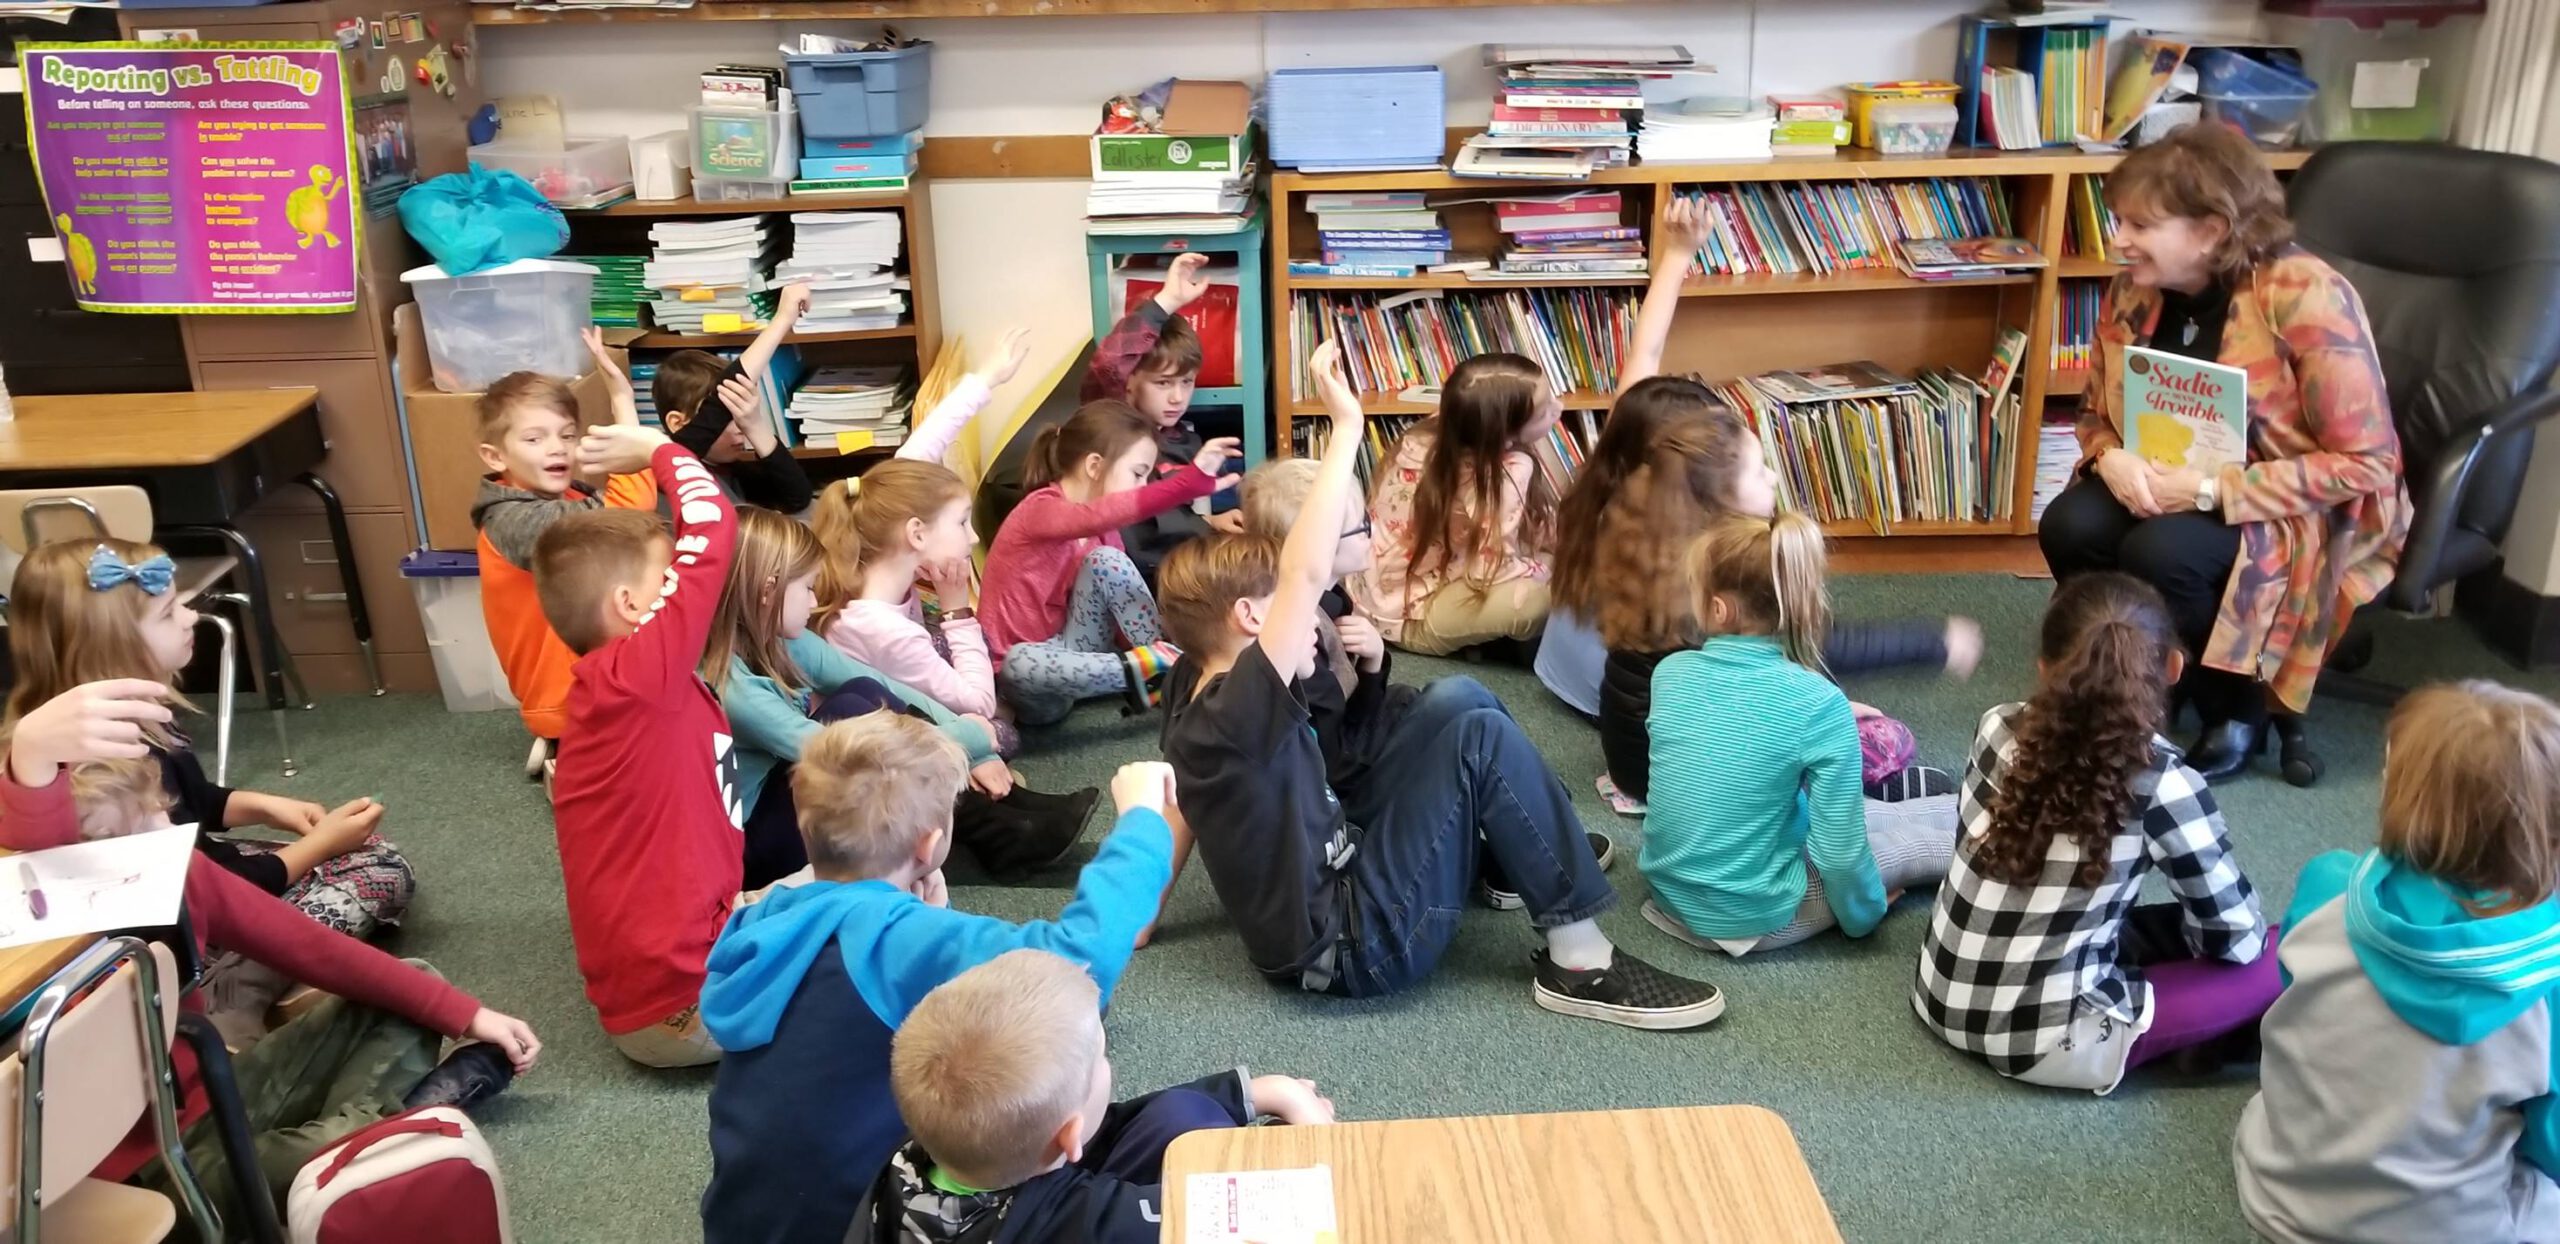 Linda Jarkley in front of a group of elementary school students with hands raised